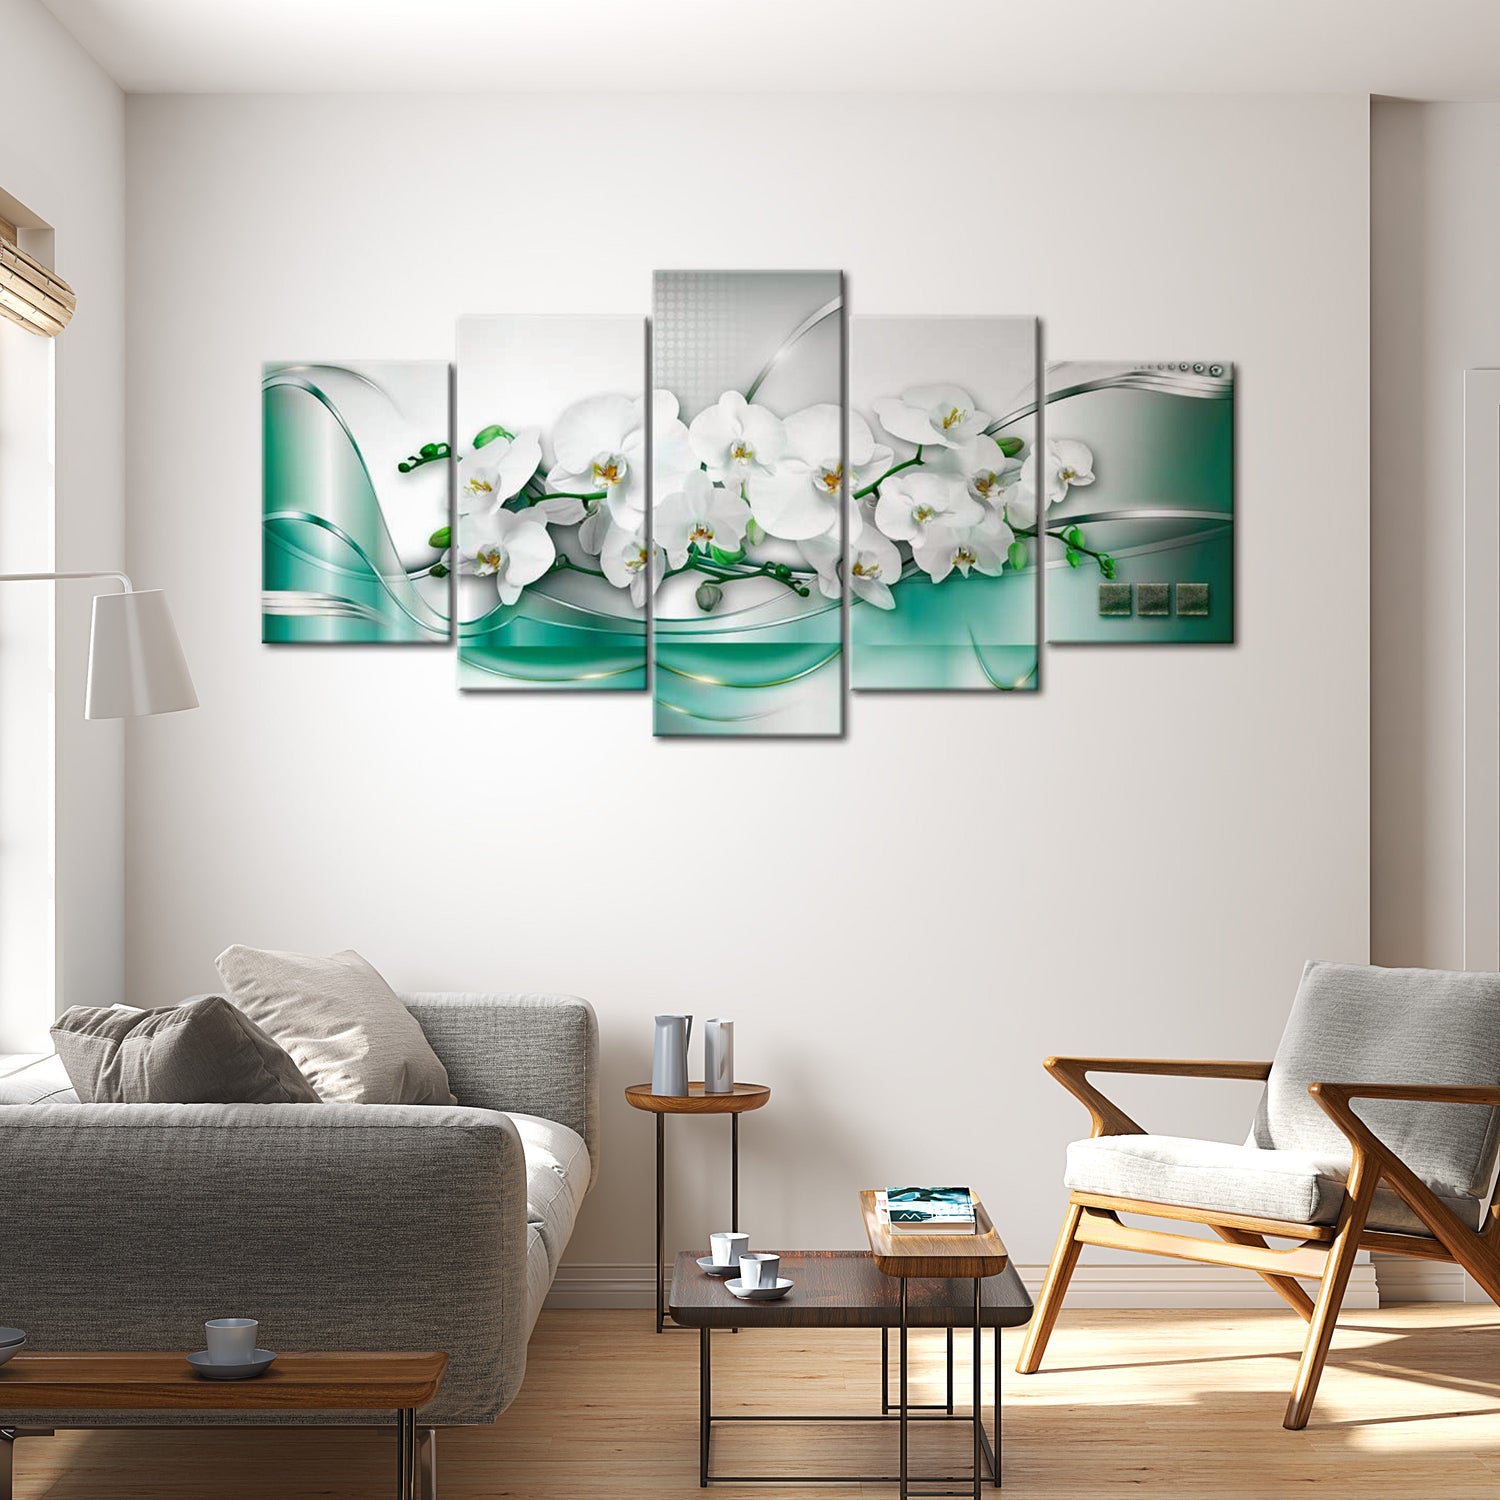 Glamour Canvas Wall Art - Celadon Ribbons - 5 Pieces